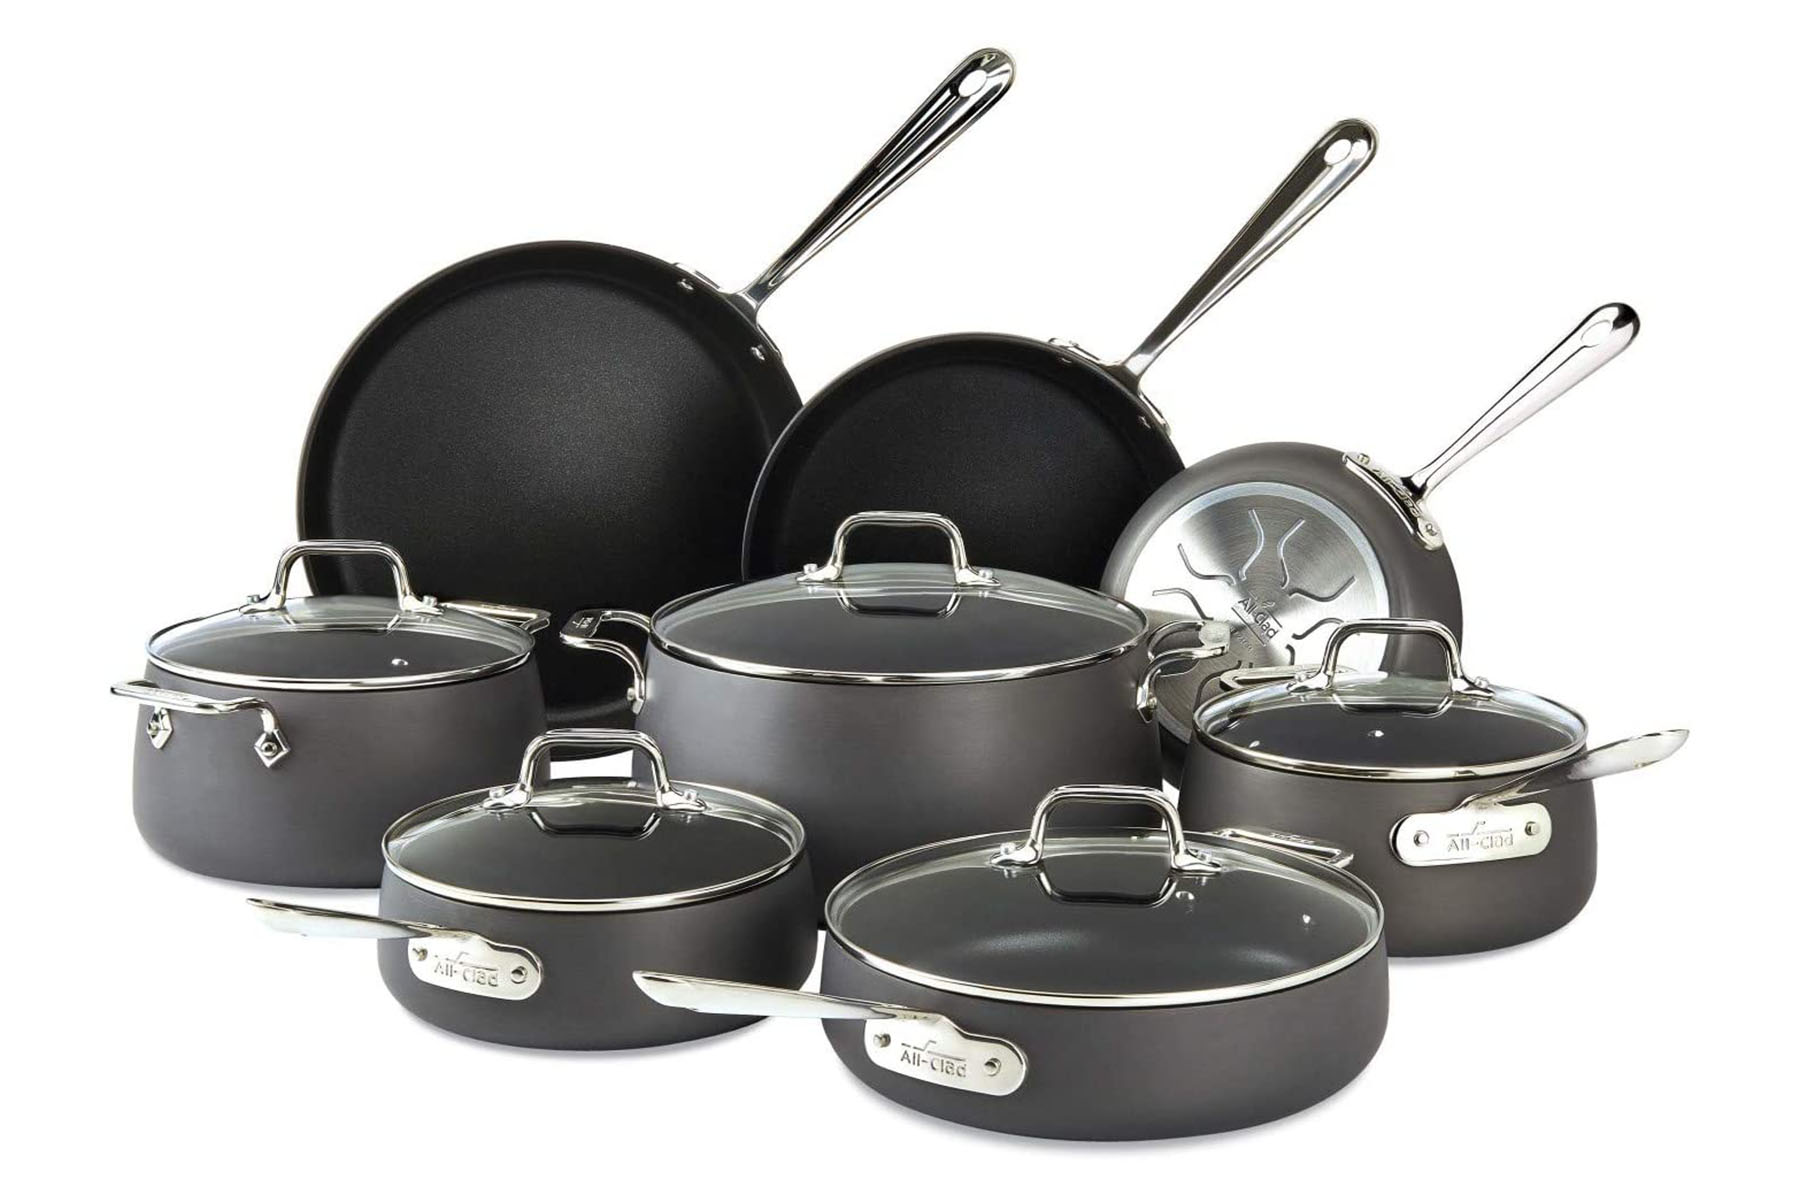 15 Best Non-Stick Cookware Sets: Your Buyer's Guide (2021) | Heavy.com